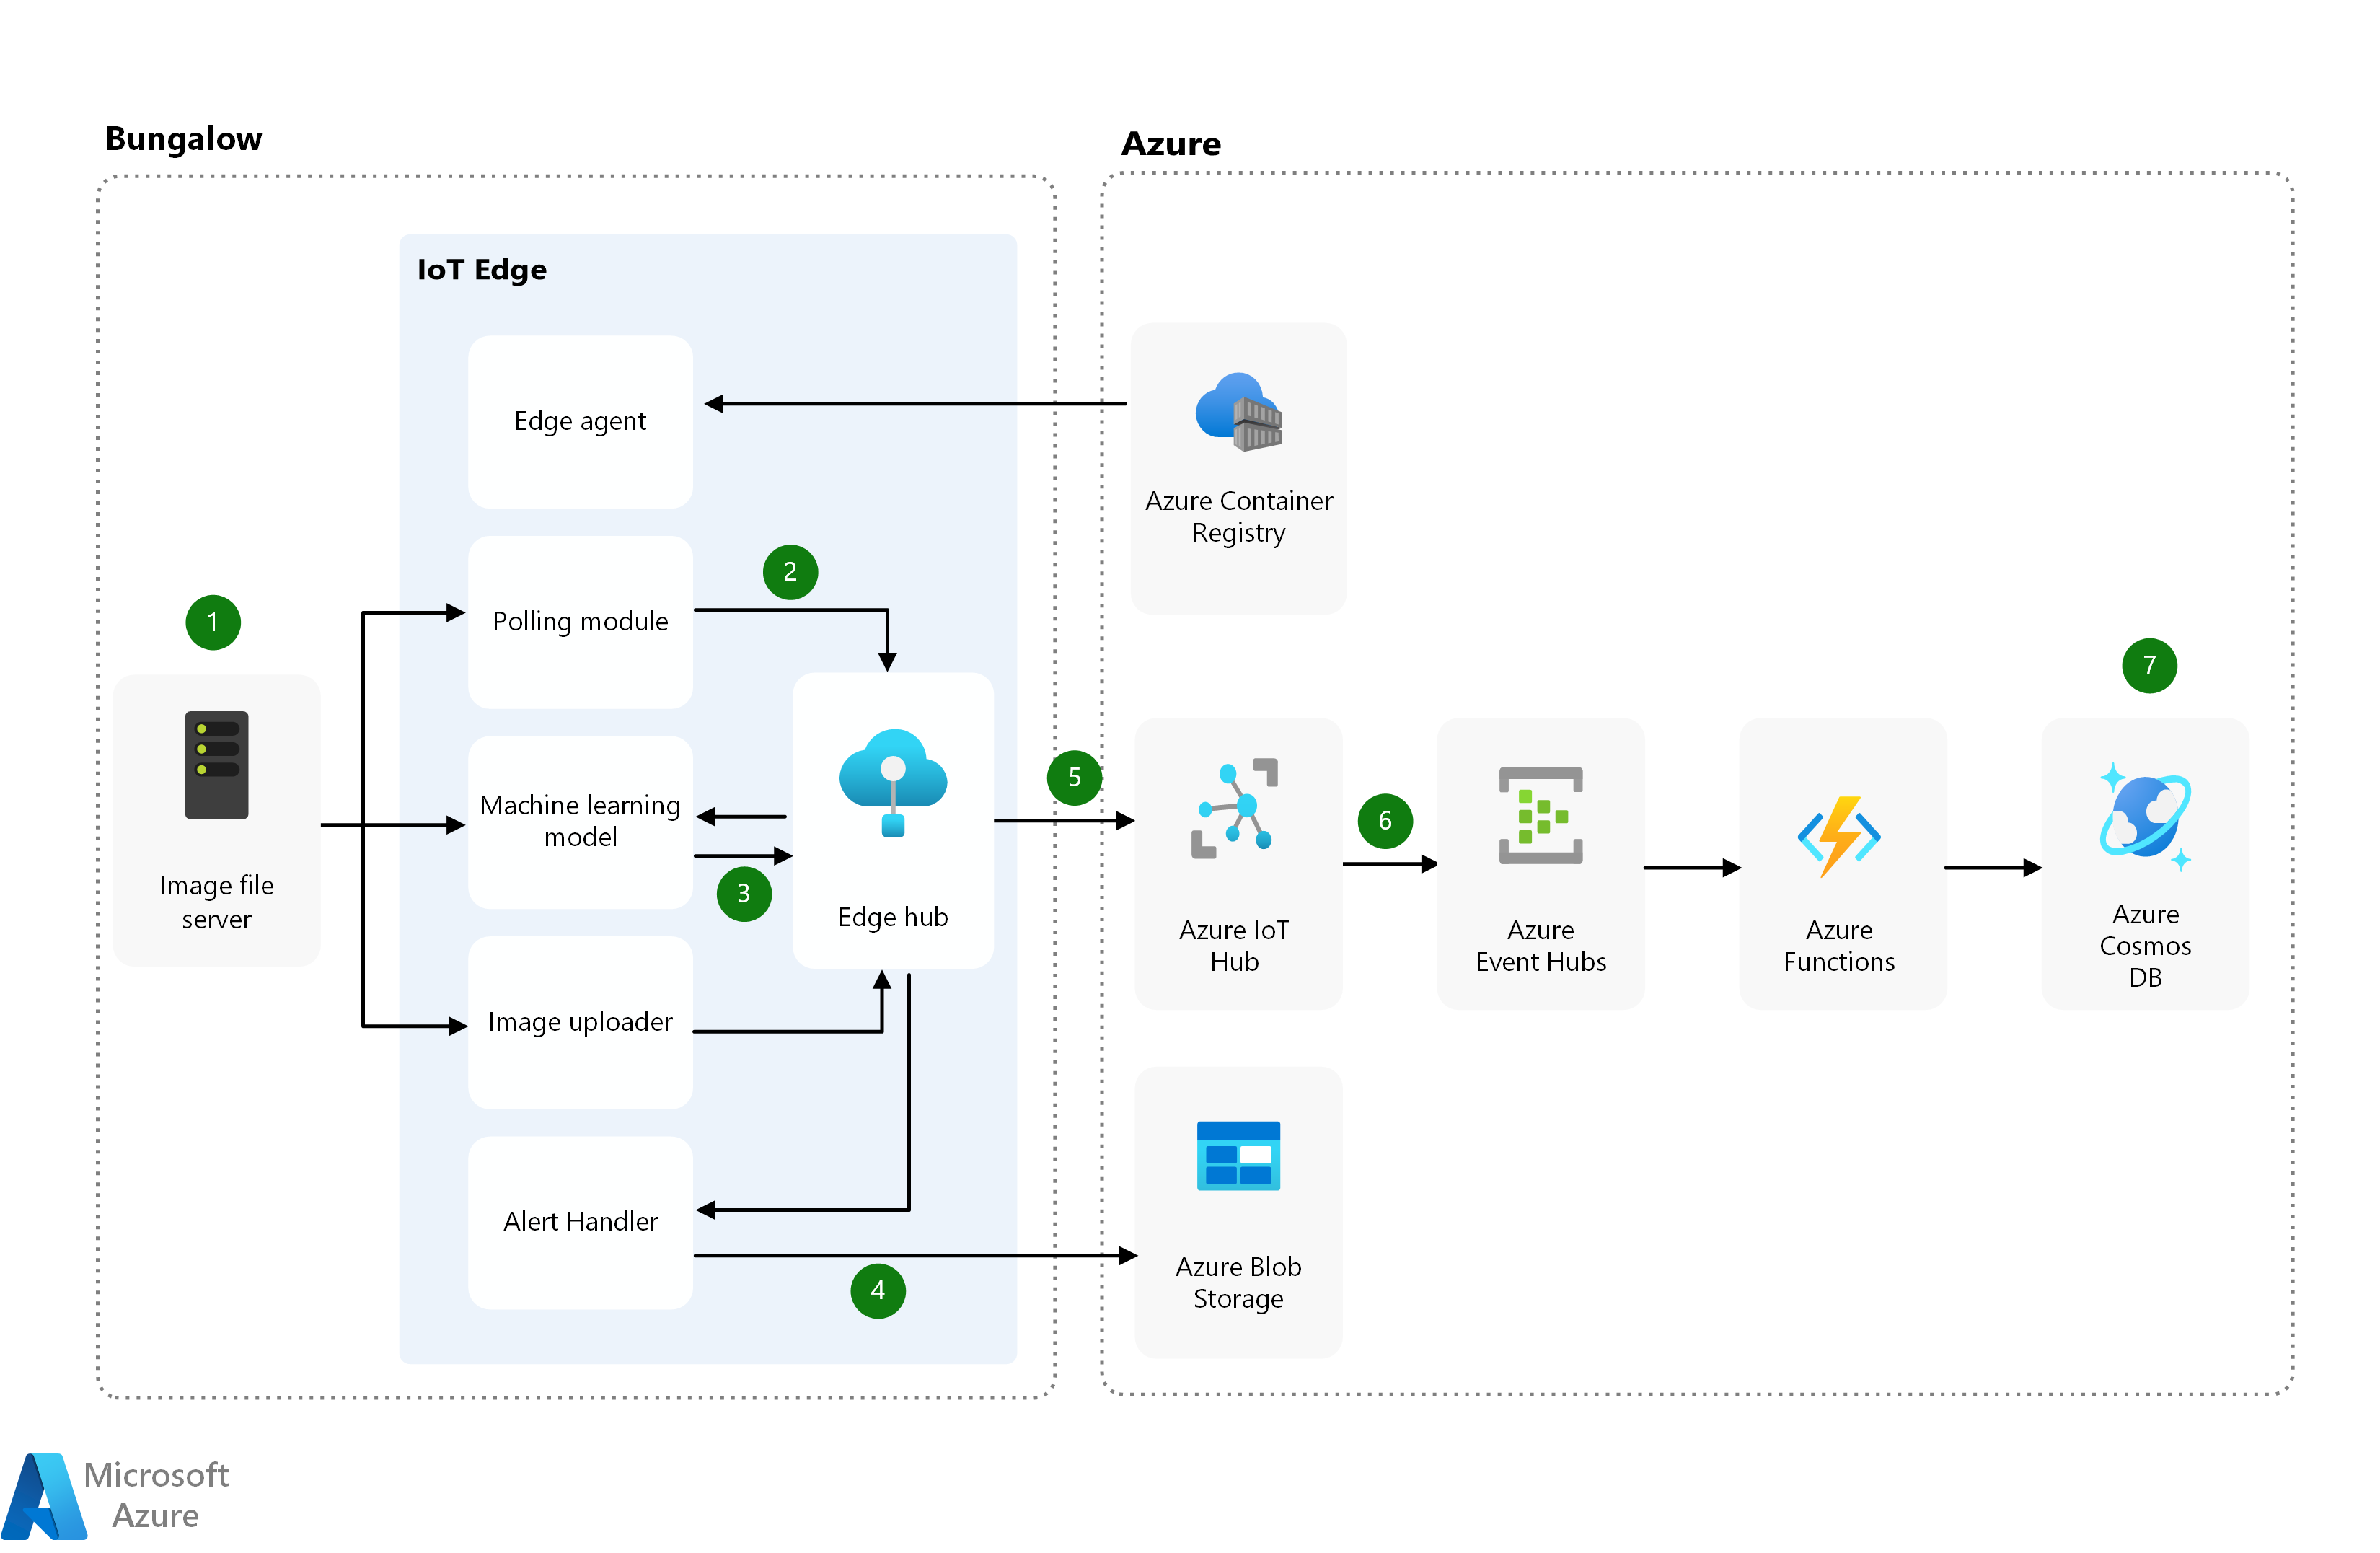 Solution architecture diagram showing the IoT Edge modules in the trackside bungalows. The Edge modules use machine learning to identify failure risks. The alert handler module uploads image data to Azure Blob Storage. Azure Edge Hub uploads associated metadata and messages through Azure IoT Hub to Azure Cosmos DB storage.